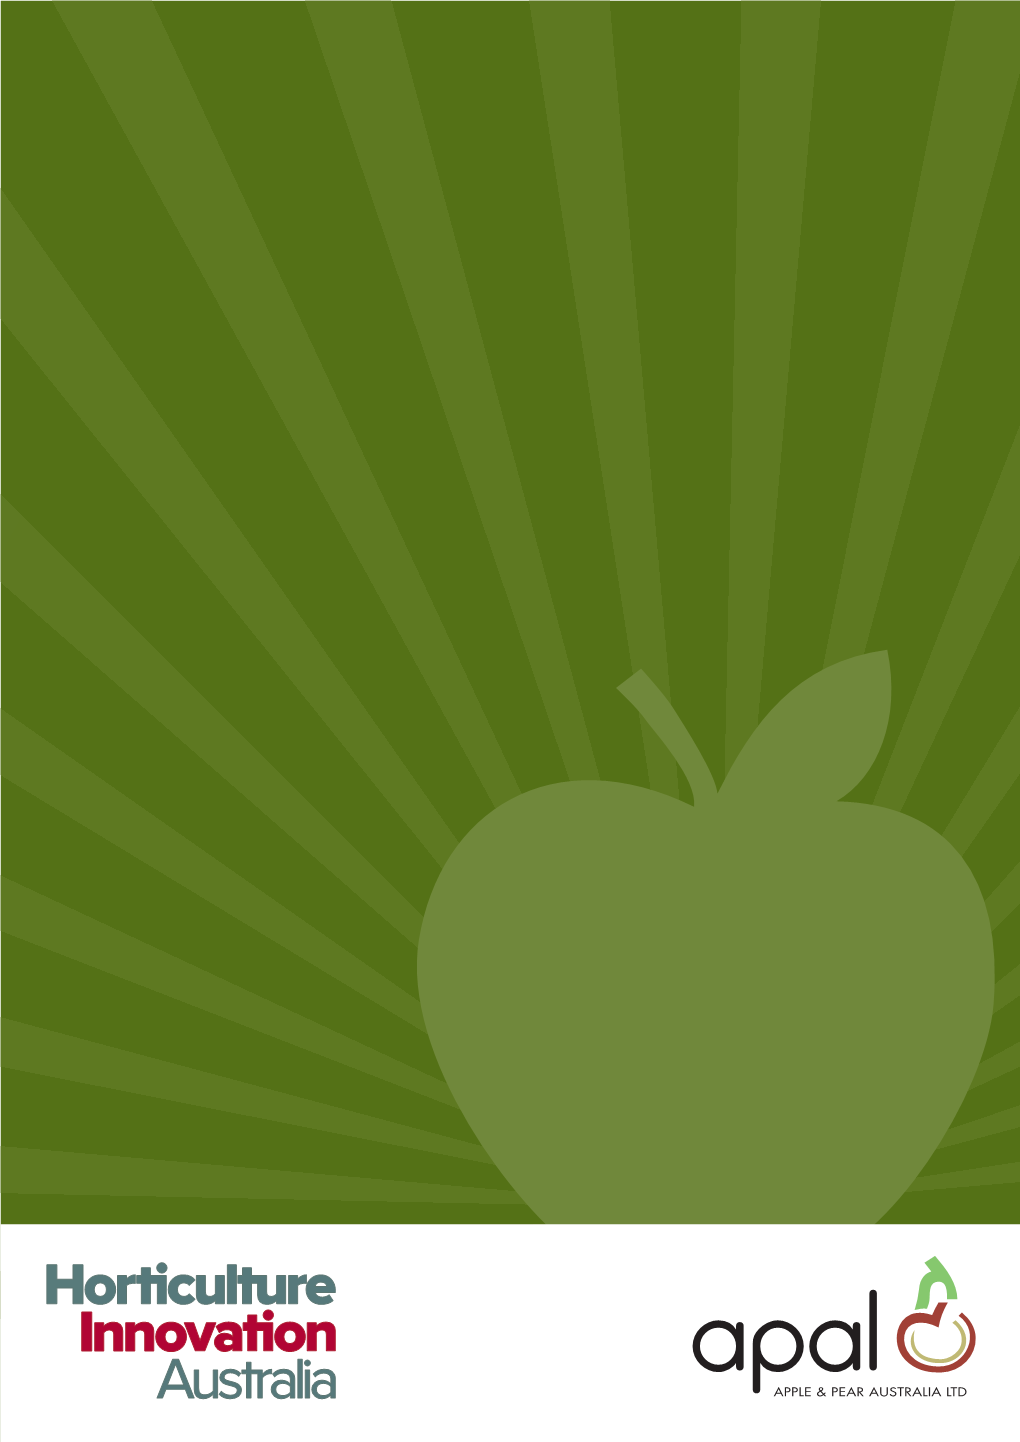 Aussie Apples Guidelines, Specifications and Product Description Language CONTENTS